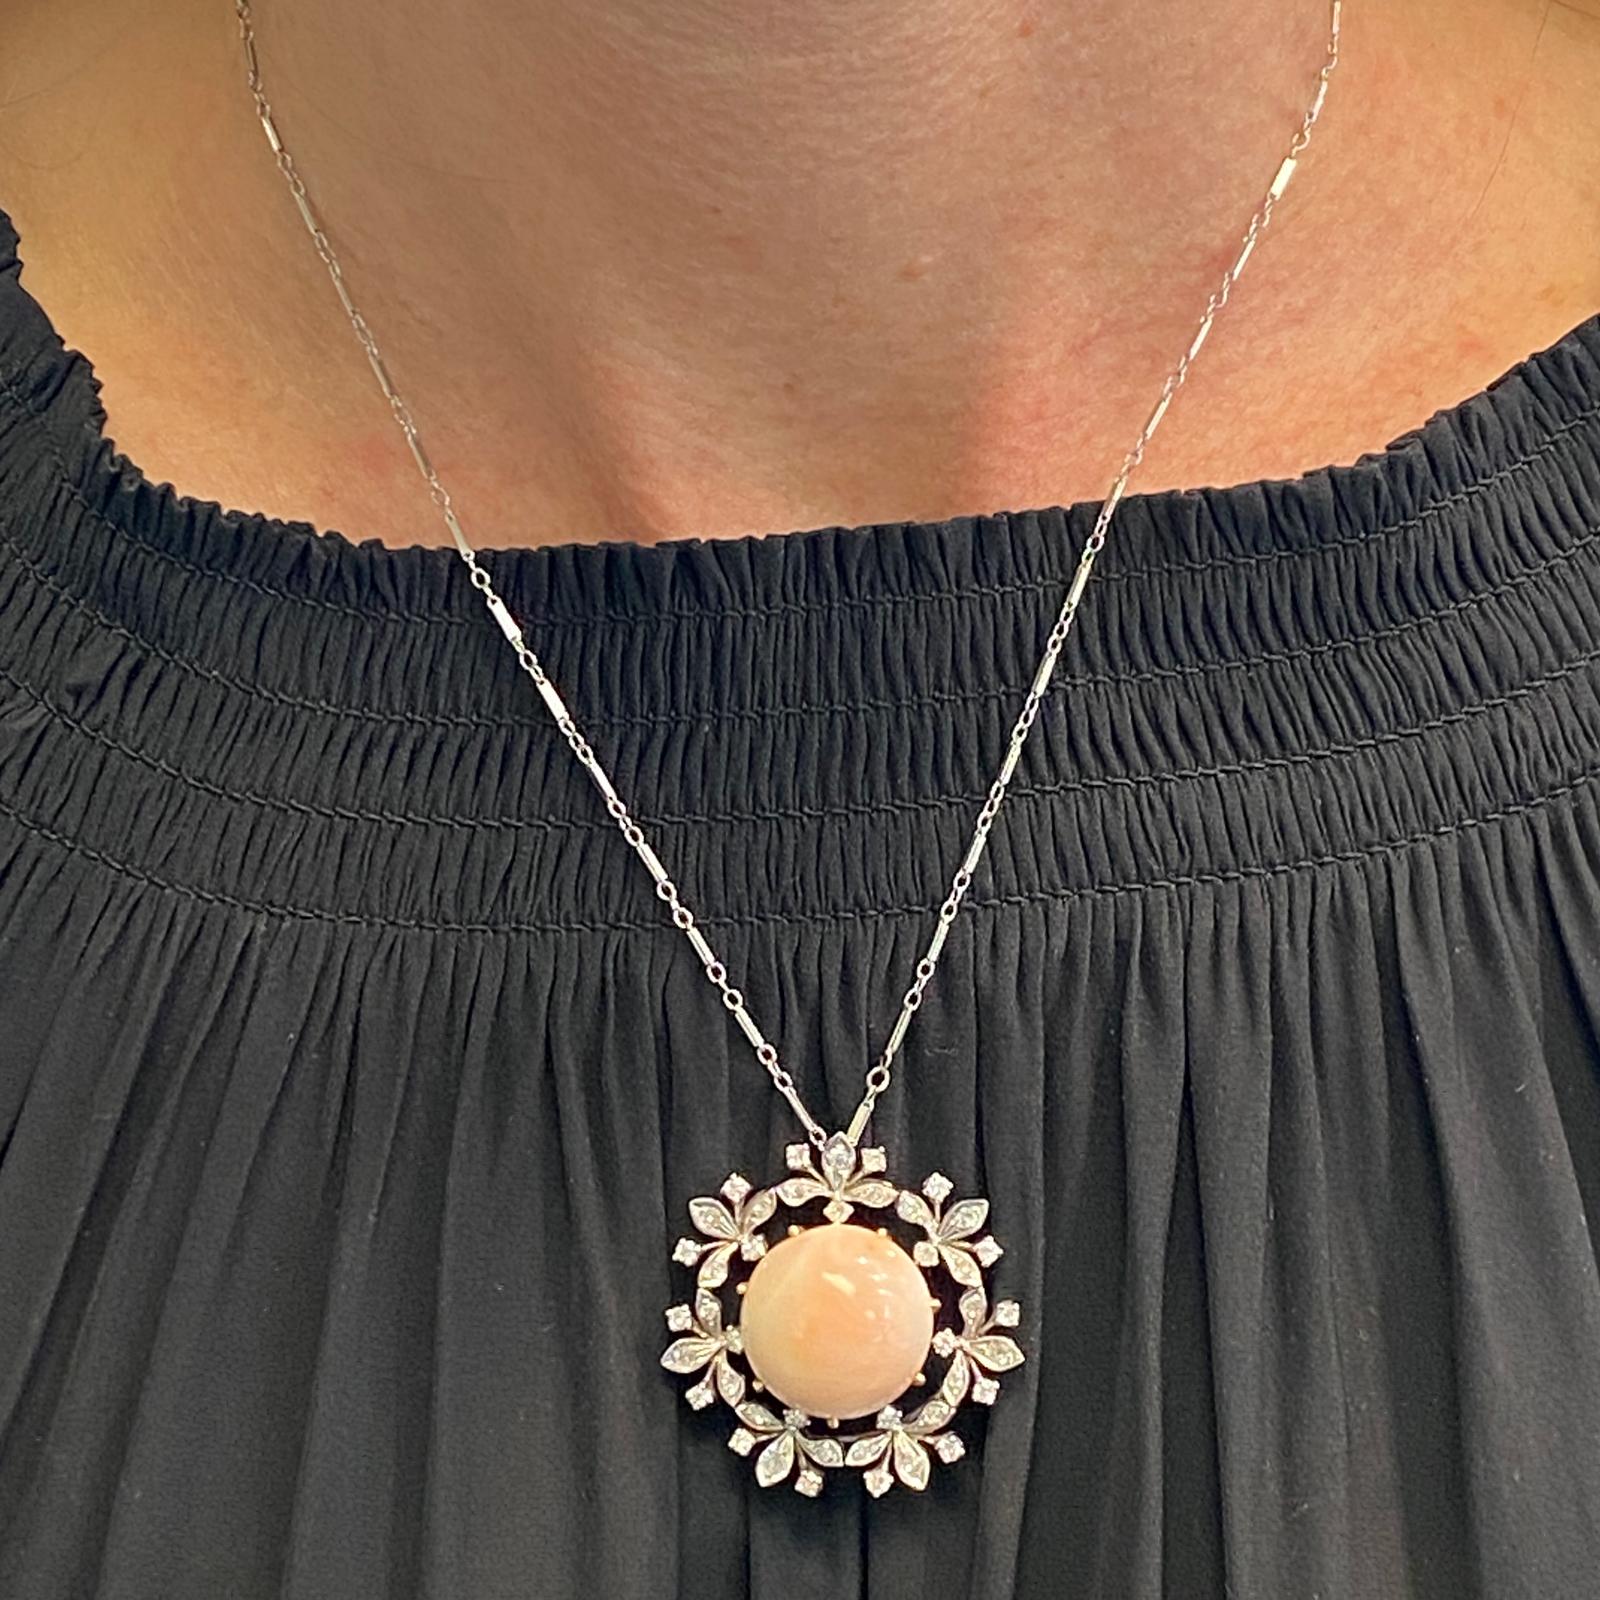 Diamond coral vintage pendant necklace fashioned in 14 karat white gold. The pendant (which can also be worn as a brooch) features 42 single cut diamonds weighing 1.00 carat total weight and graded H color and SI clarity. The diamonds are set in an